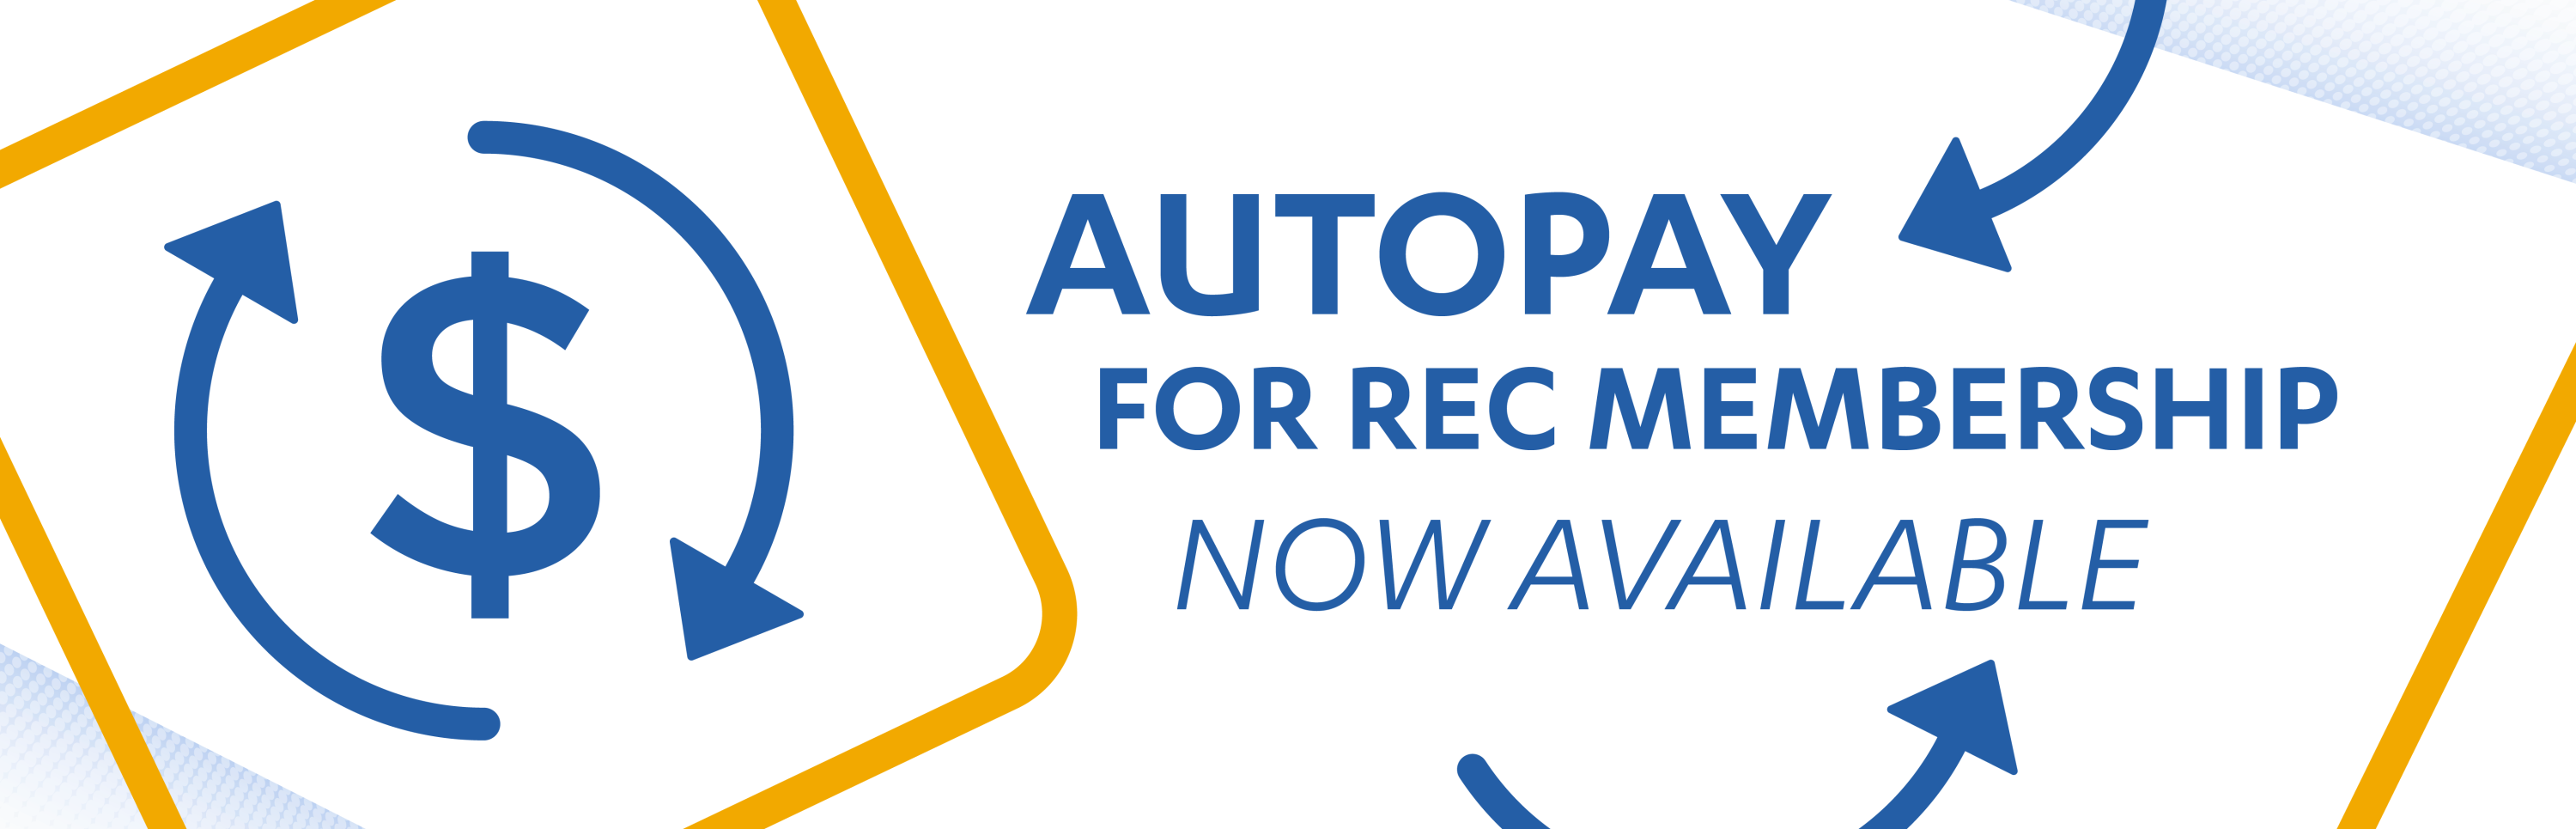 Autopay for Rec membership Now Available